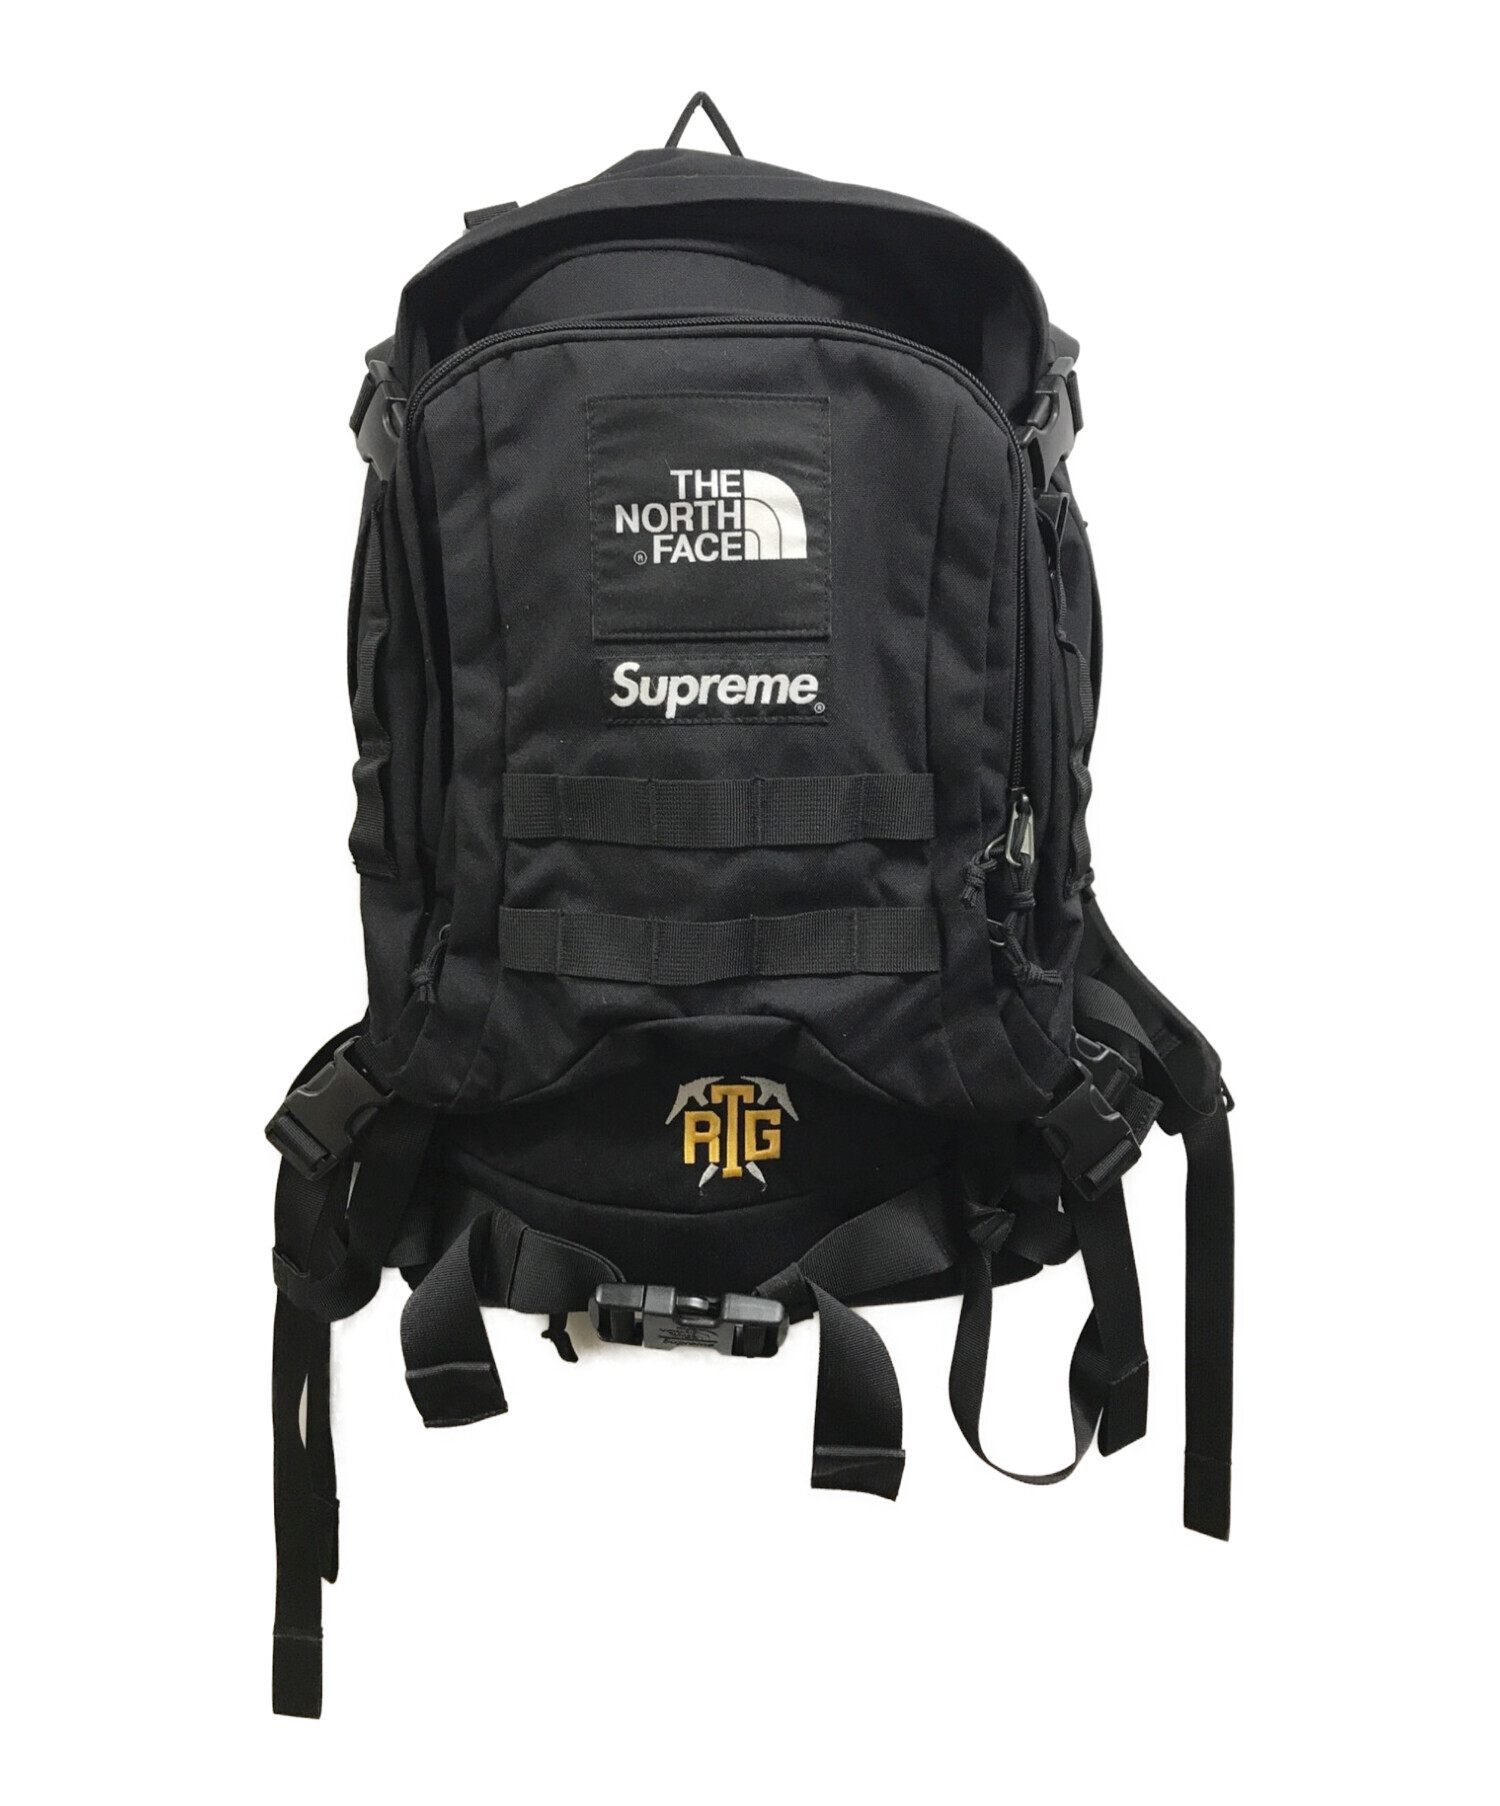 Supreme The North Face Backpack バックパック　黒